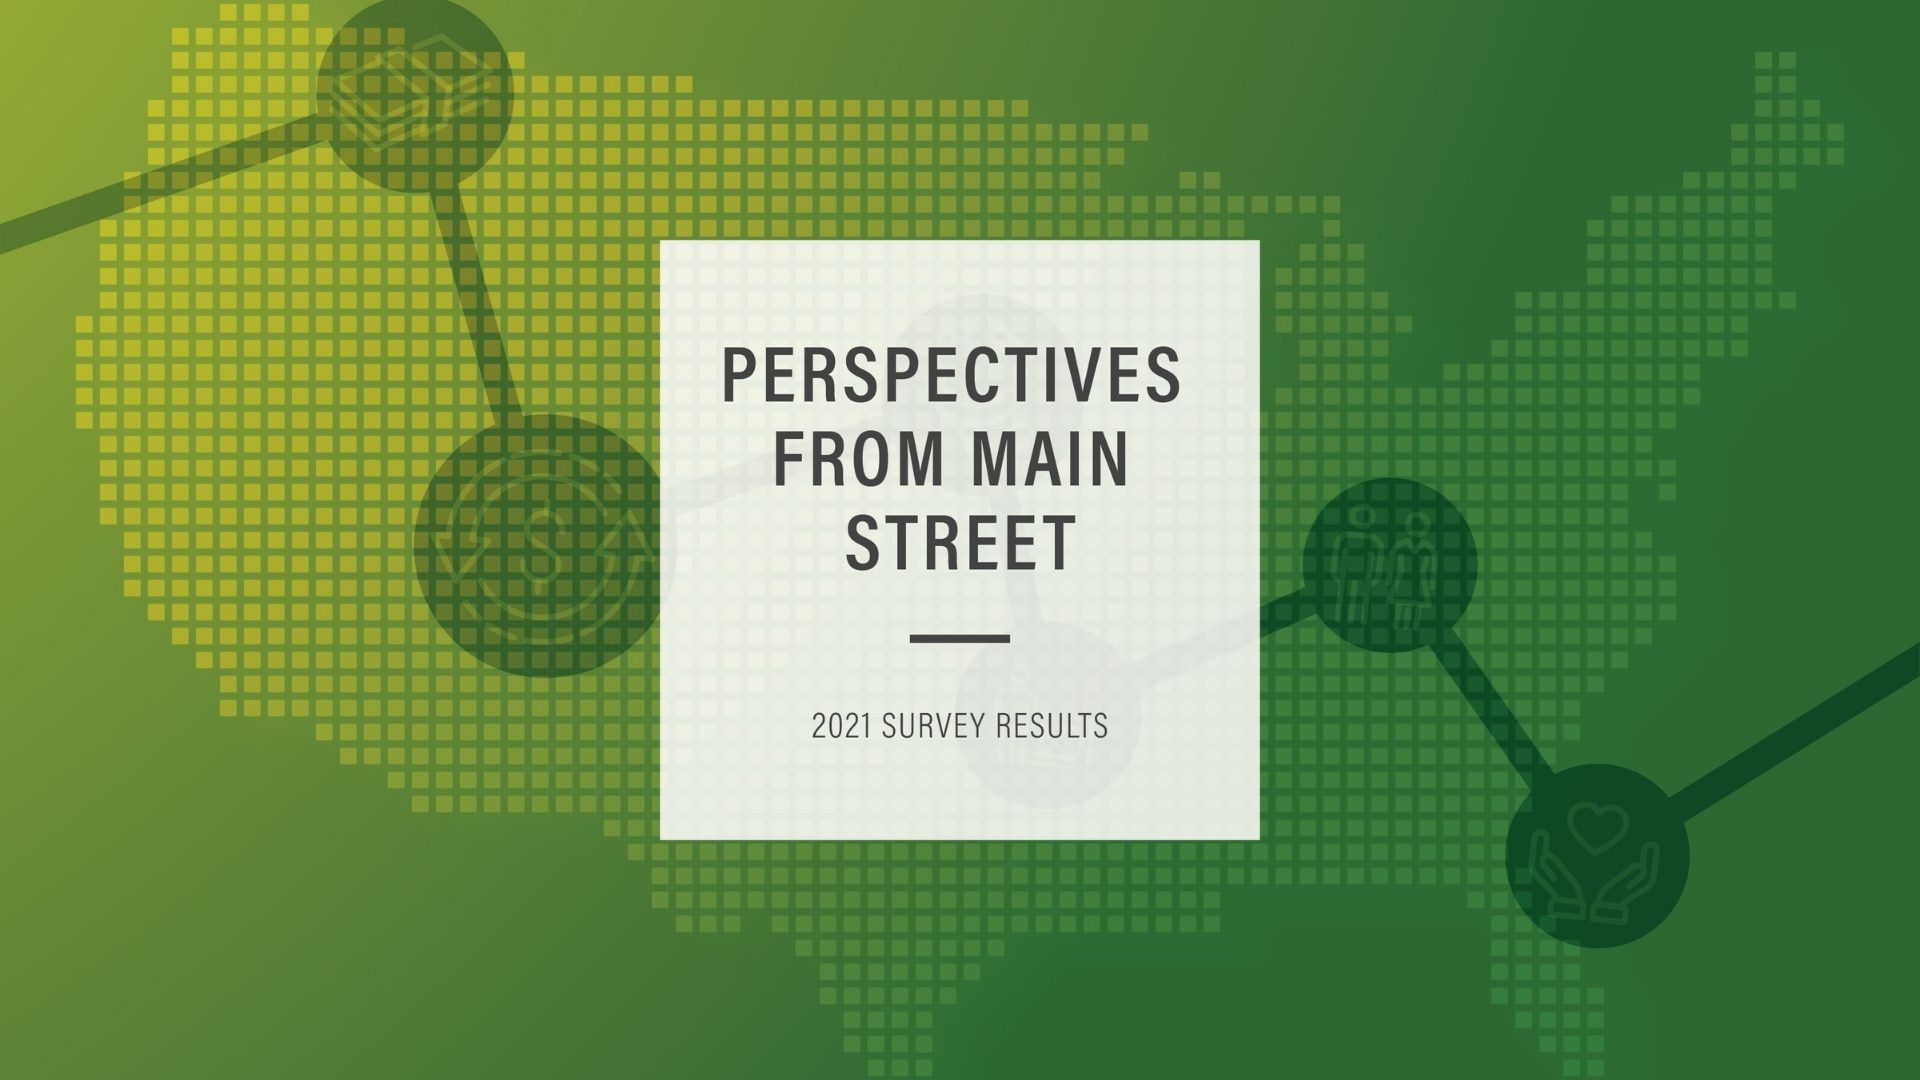 Perspectives from Main Street 2021 Survey Results